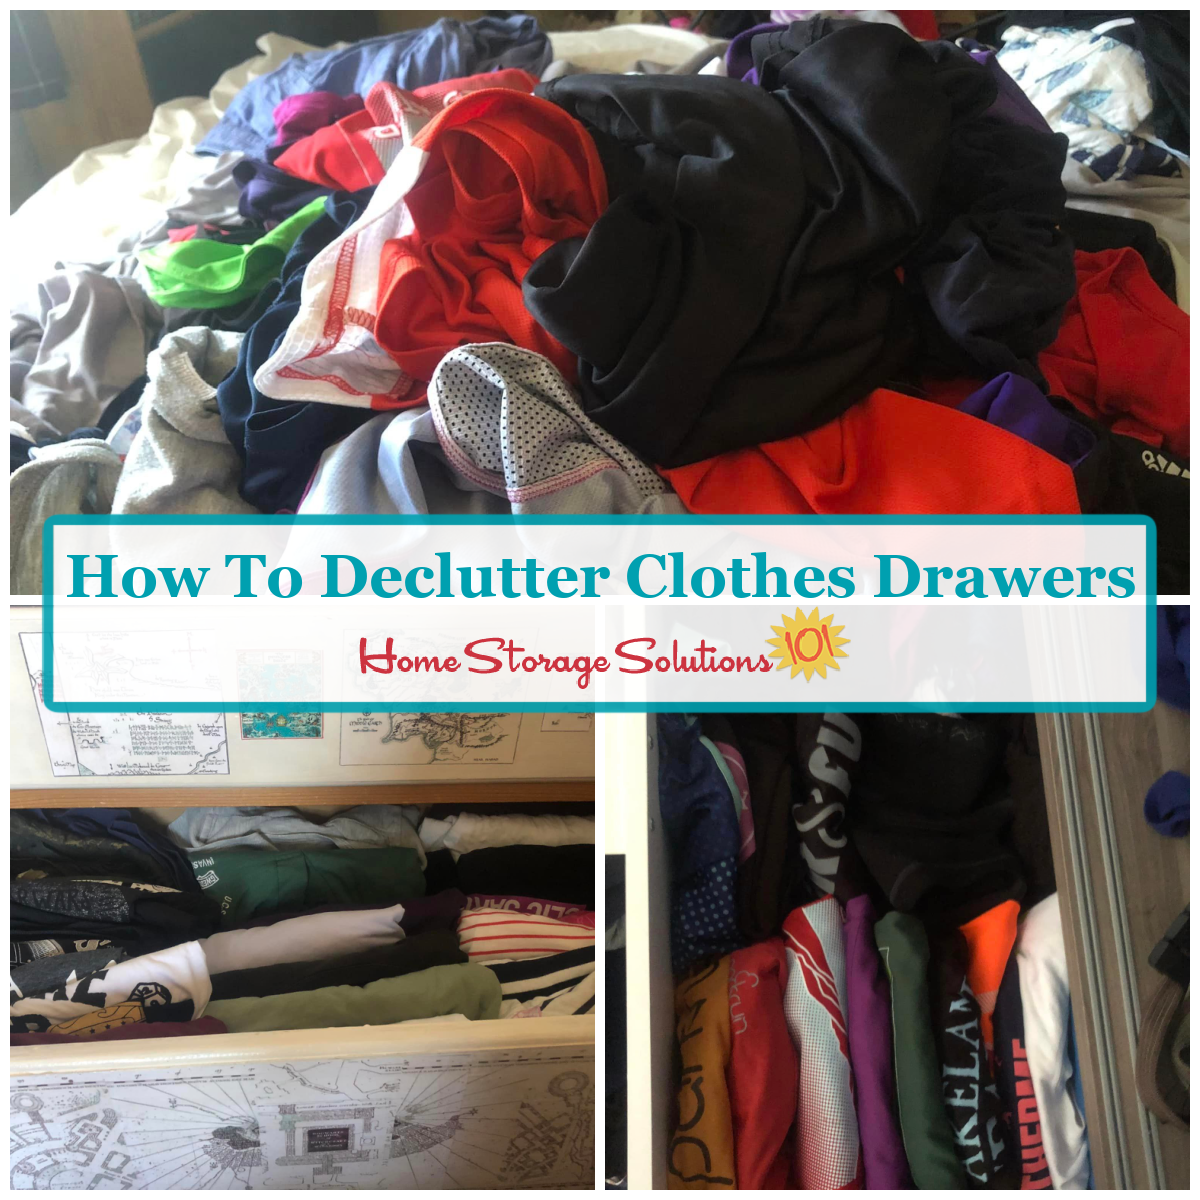 How to declutter clothes drawers {on Home Storage Solutions 101}